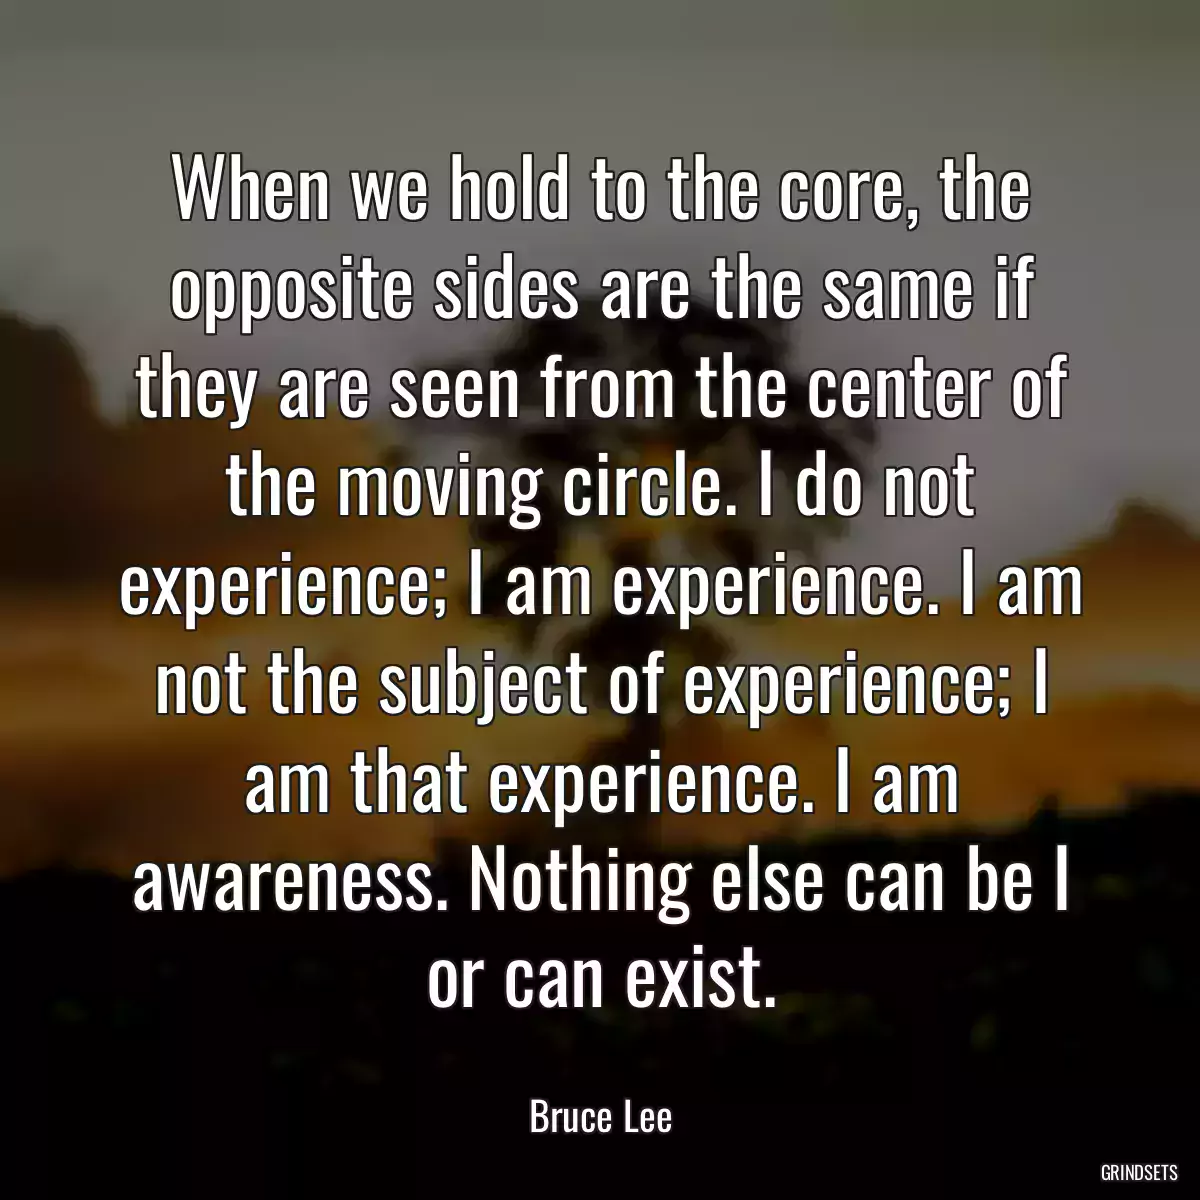 When we hold to the core, the opposite sides are the same if they are seen from the center of the moving circle. I do not experience; I am experience. I am not the subject of experience; I am that experience. I am awareness. Nothing else can be I or can exist.